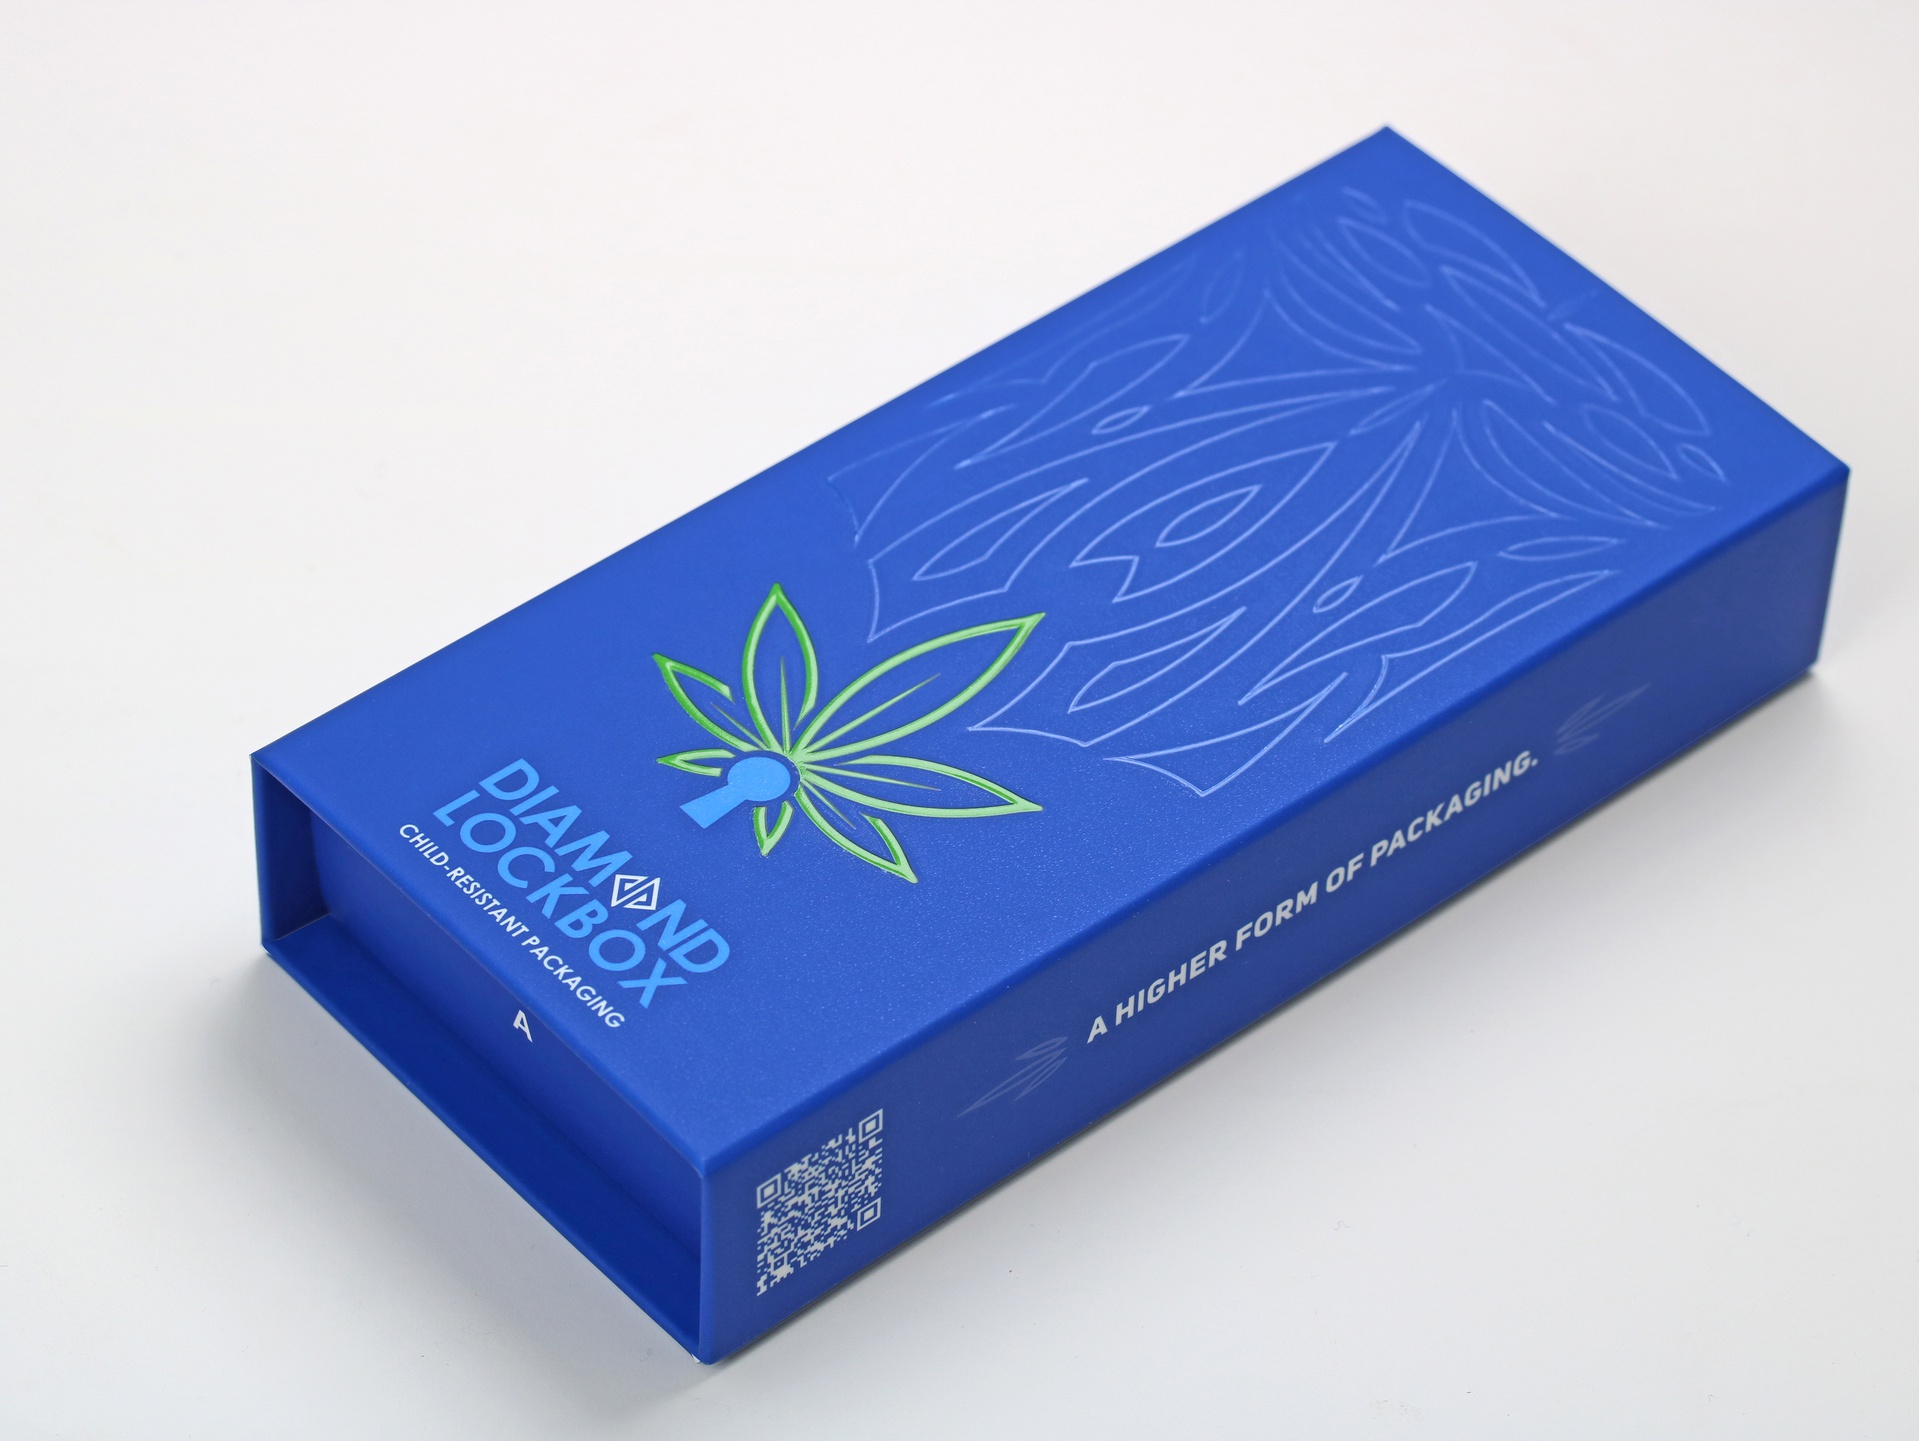 Diamond Lockbox® folding cartons are an upscale, certified child-resistant (CR) packaging solution for medical or recreational marijuana products.